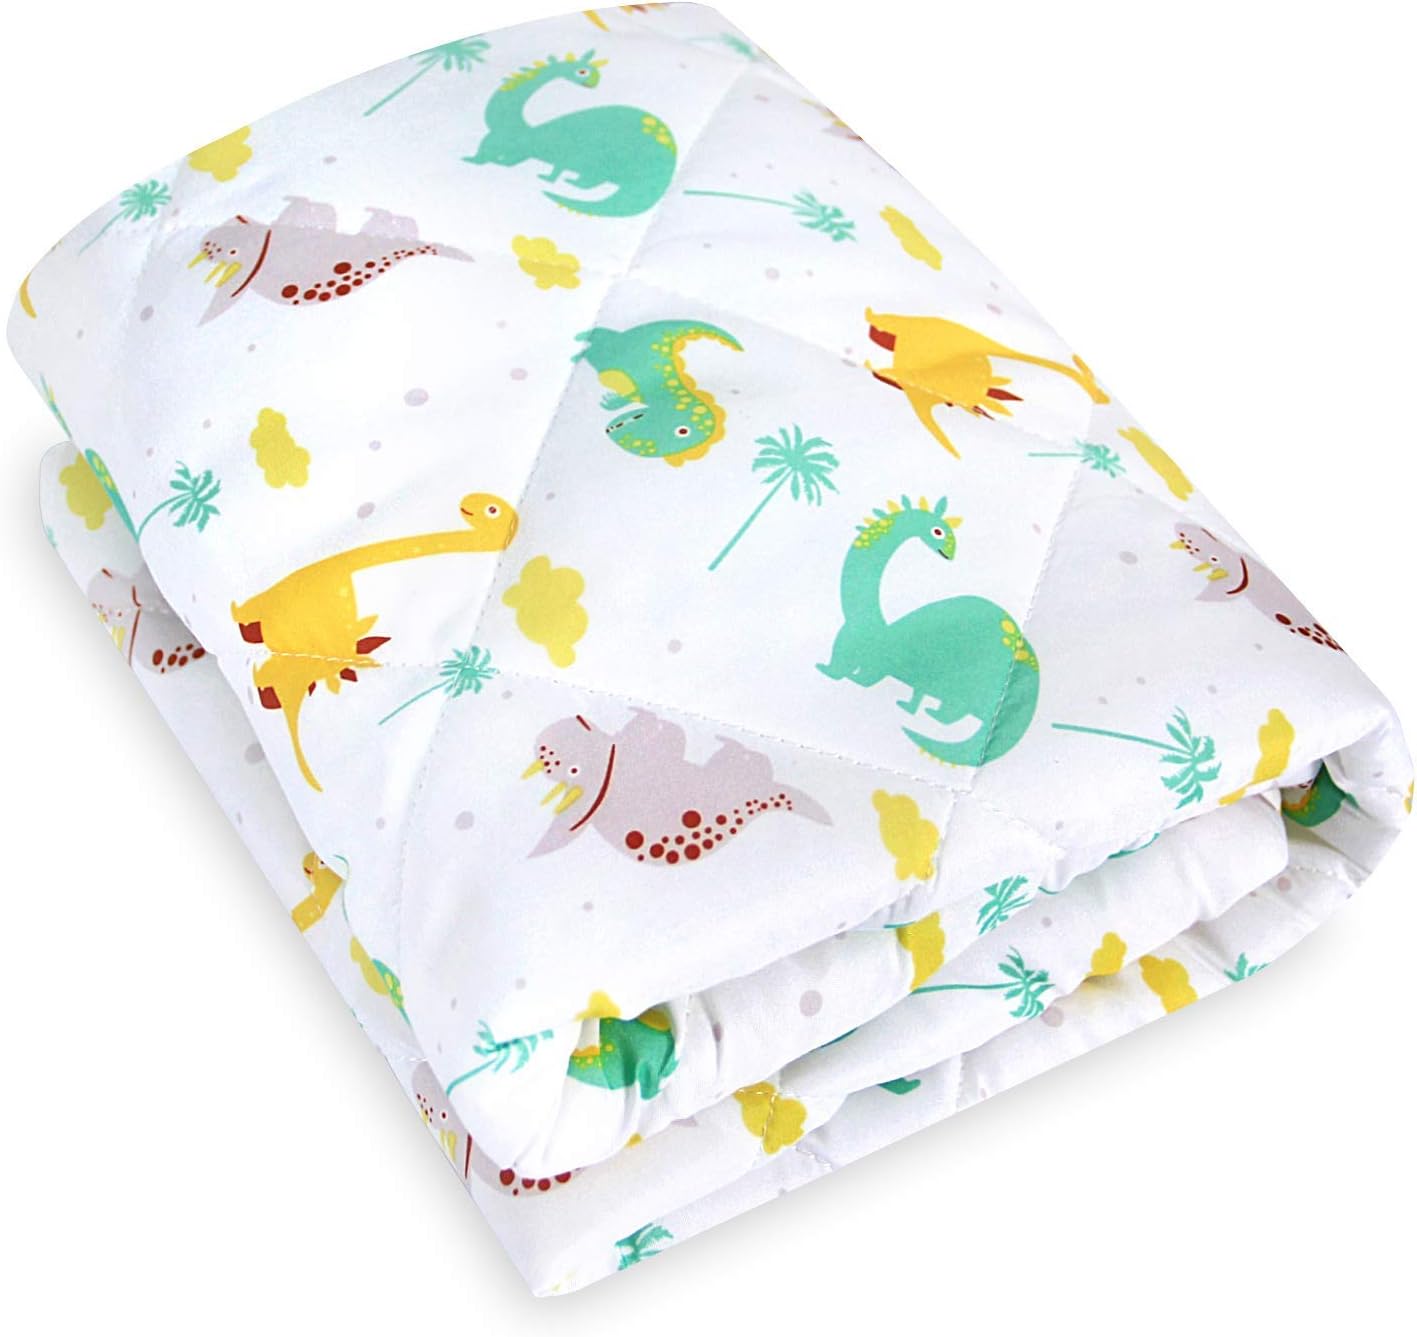 Pack n Play Sheet Quilted | Mini Crib Sheet - Pack and Play Mattress Pad Cover, Ultra-Soft Microfiber, Fits Graco Pack and Play, Dinosaur